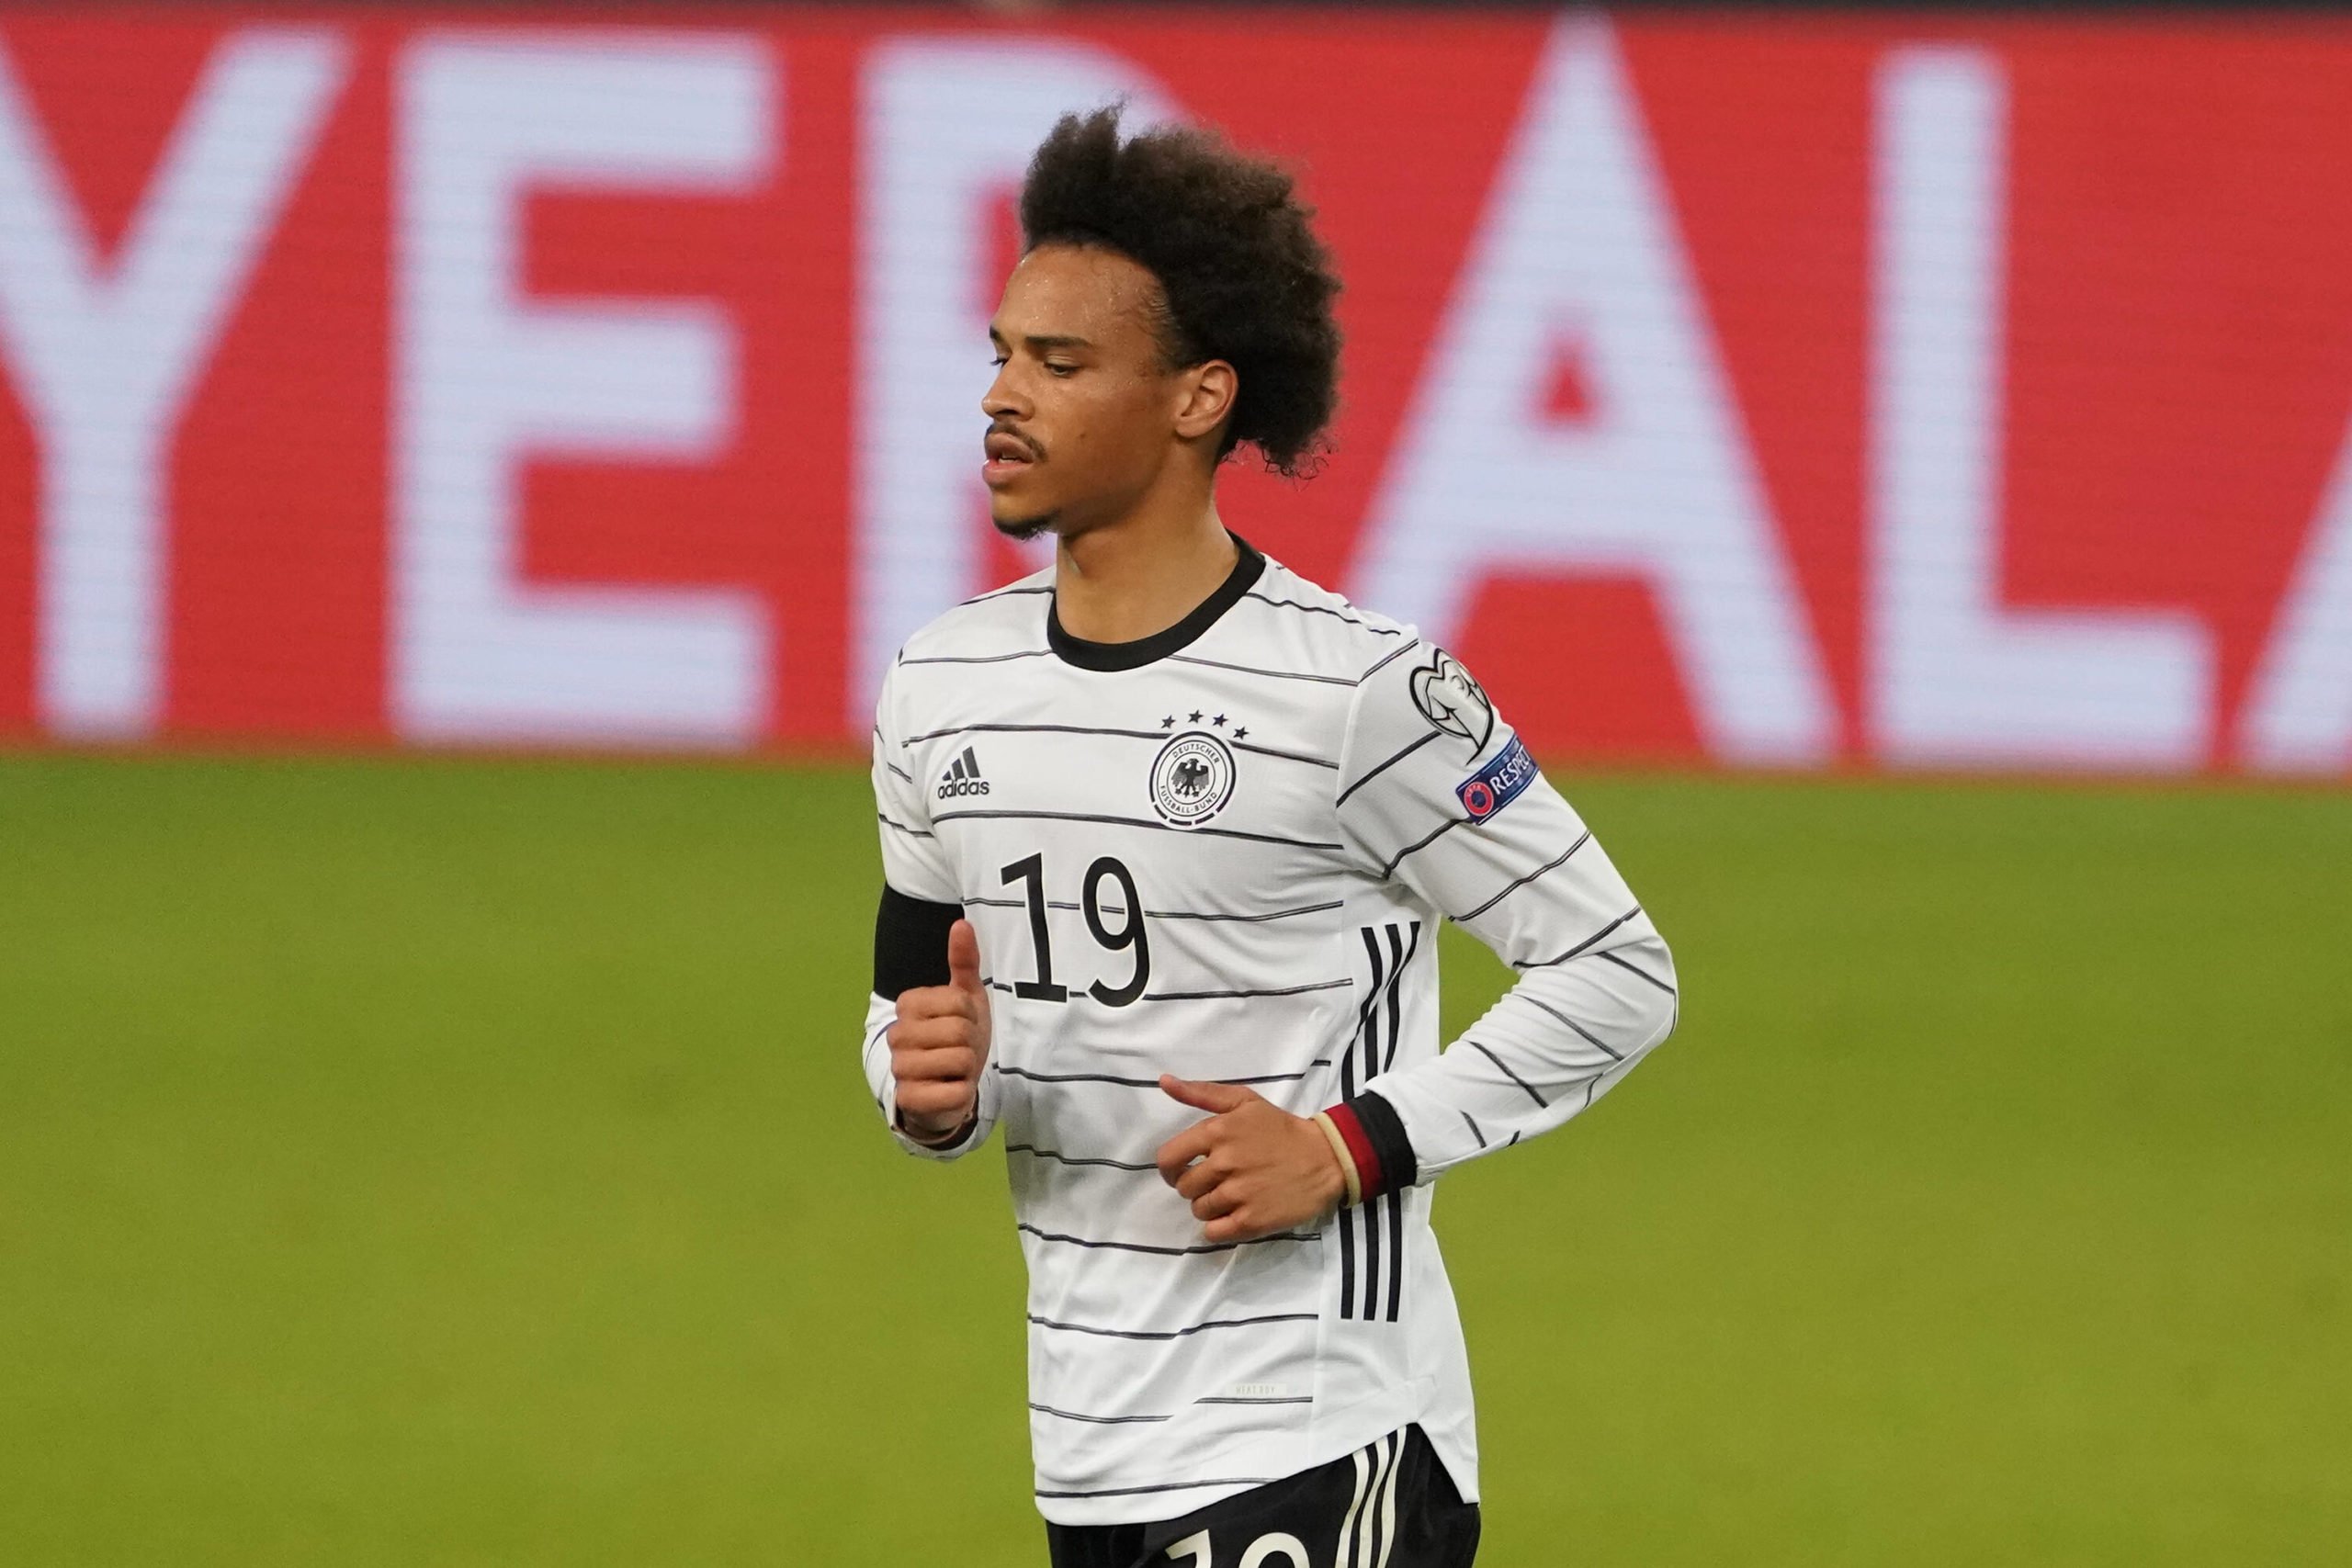 Arsenal target Leroy Sane in action with Germany